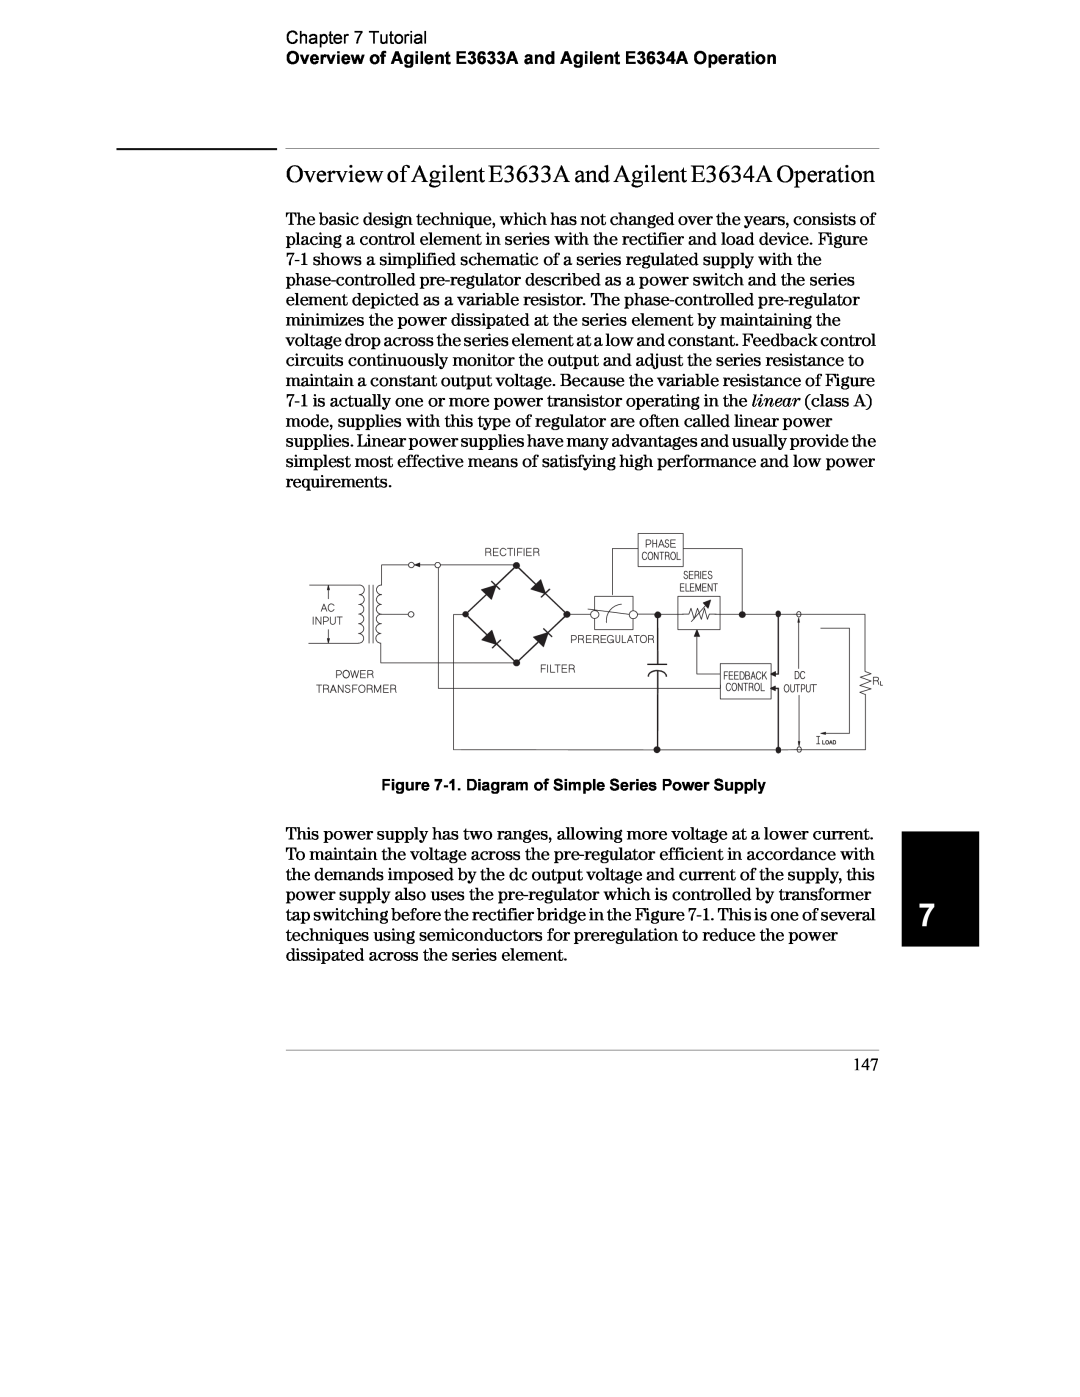 Agilent Technologies Overview of Agilent E3633A and Agilent E3634A Operation, 1. Diagram of Simple Series Power Supply 